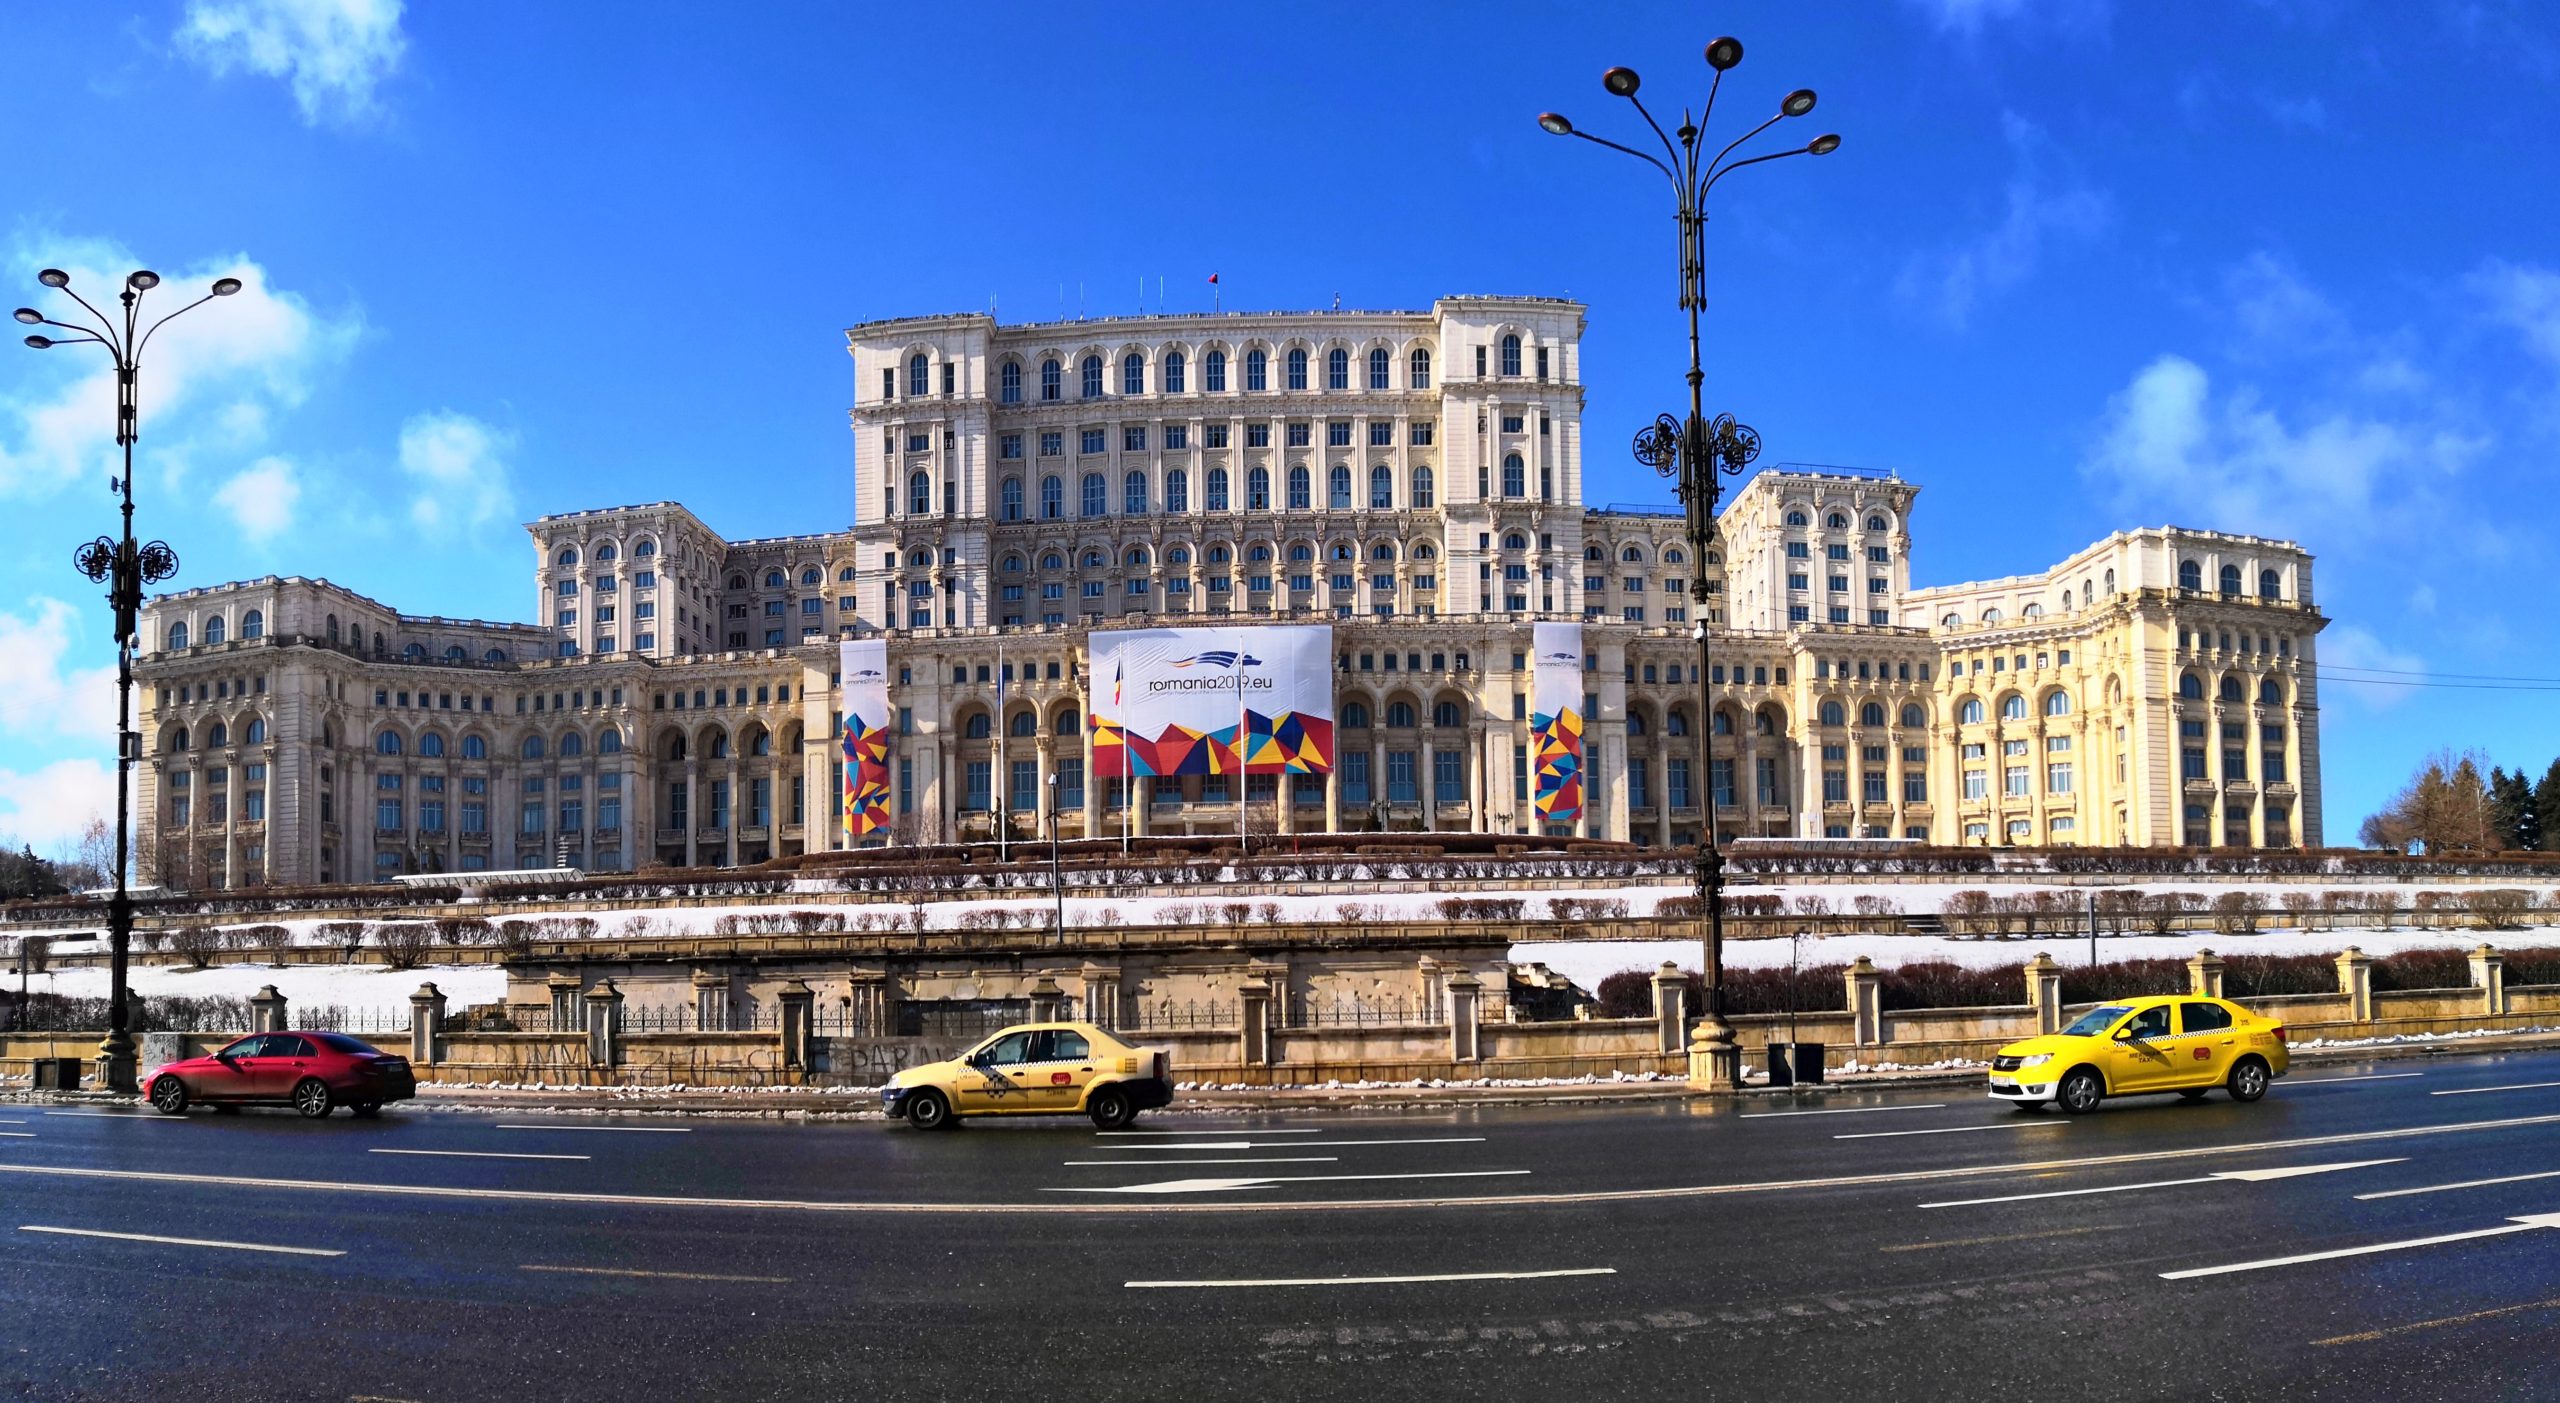 Romania’s Palace of the Parliament: Horrible Kitsch or Masterpiece?